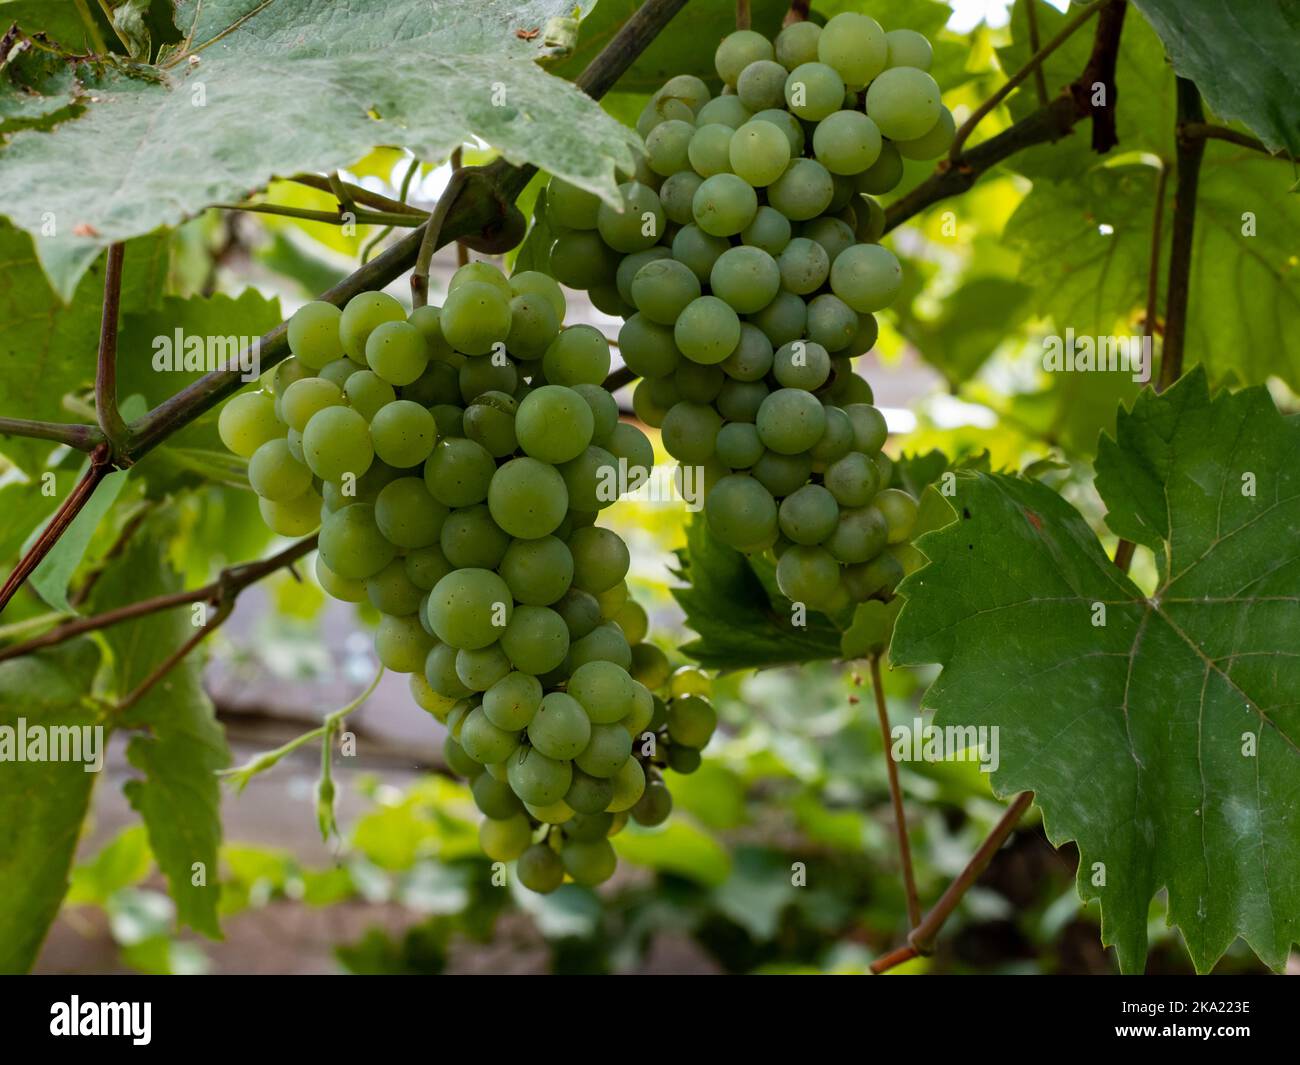 Green grapes are hanging on vines. Ripe sweet fruits cultivated in a German garden. Natural food in organic quality is growing during summer. Stock Photo